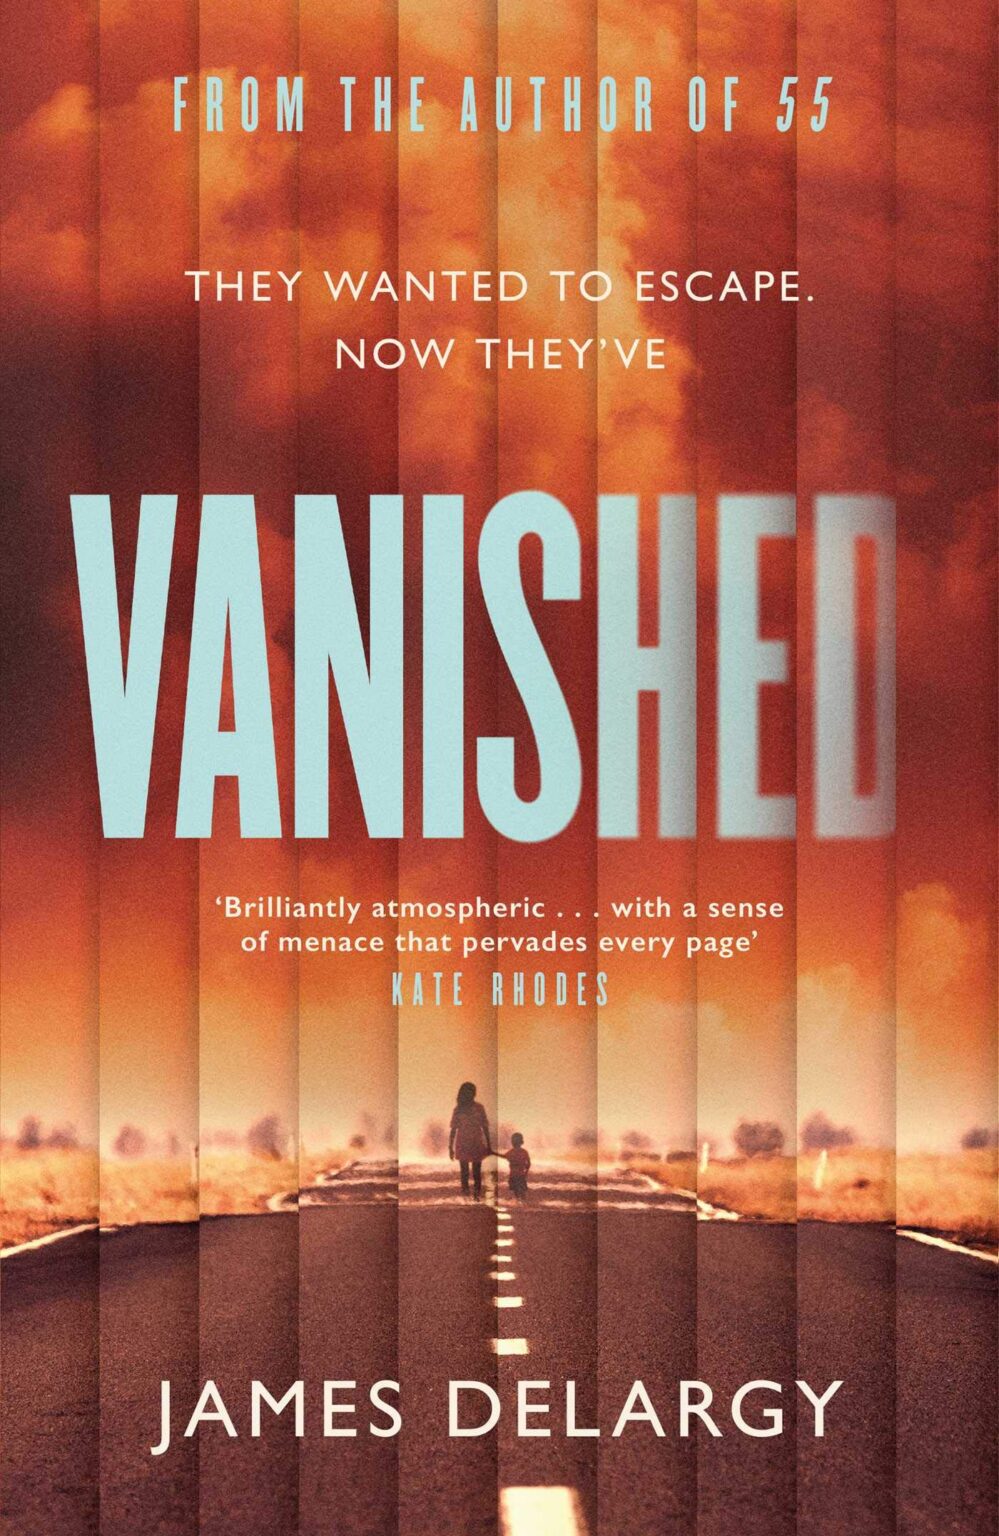 Vanished Book Review Featz Reviews